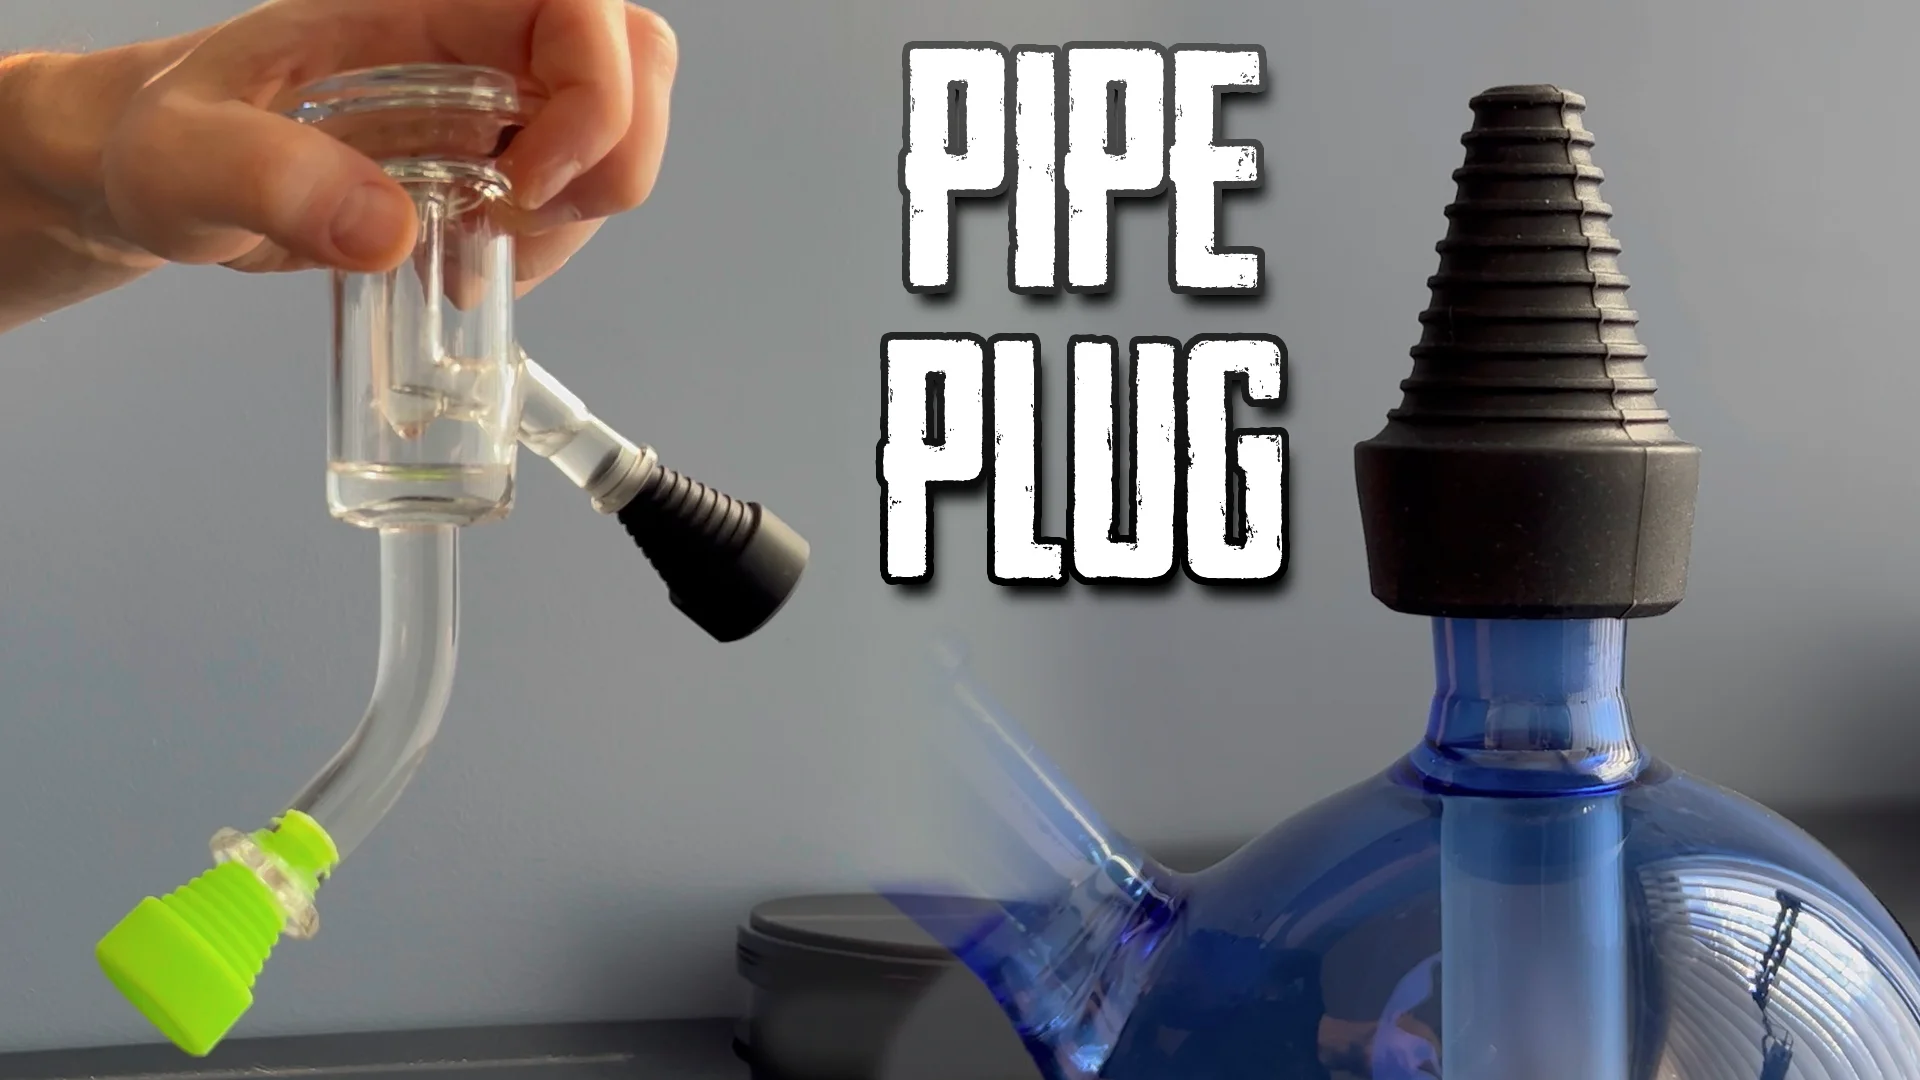 How to Use a Pollen Press  Sneaky Pete's Vaporizer Reviews on Vimeo